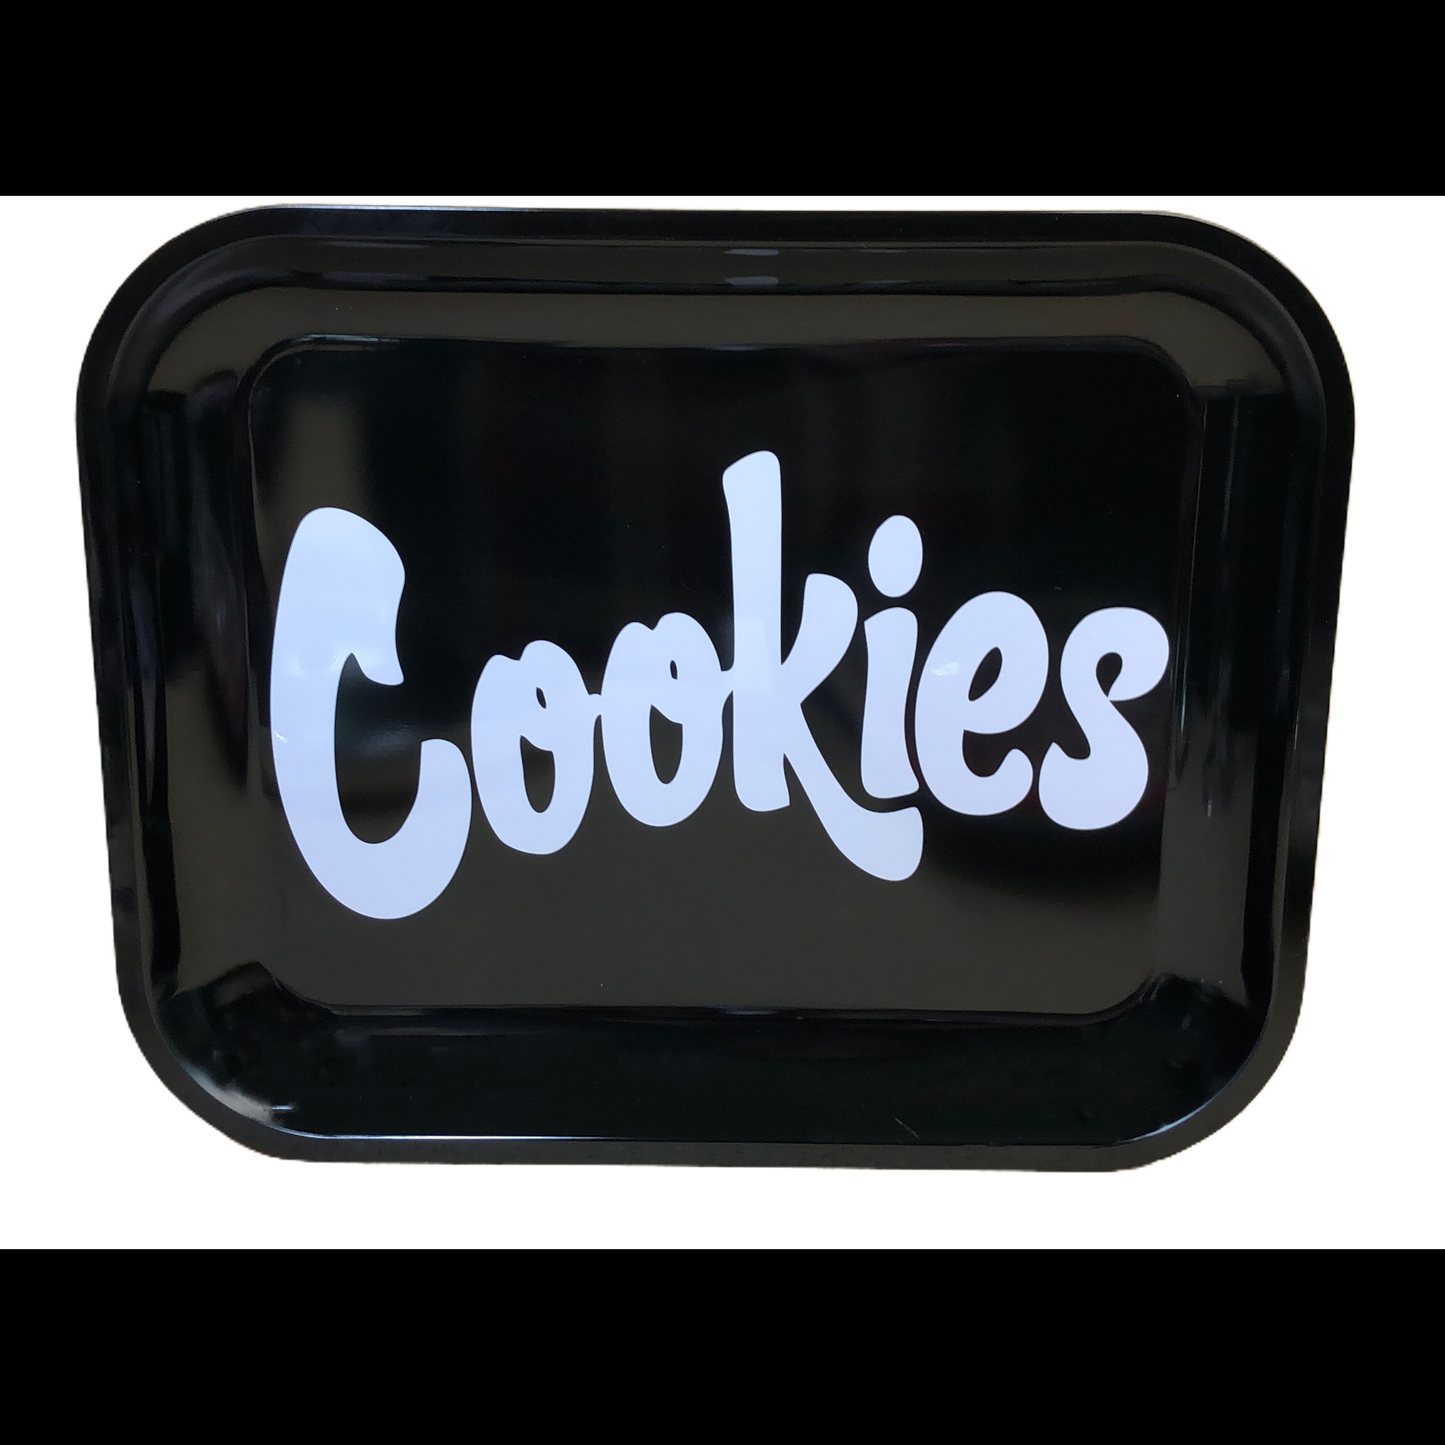 Cookies Graphic Rolling Tray - Black